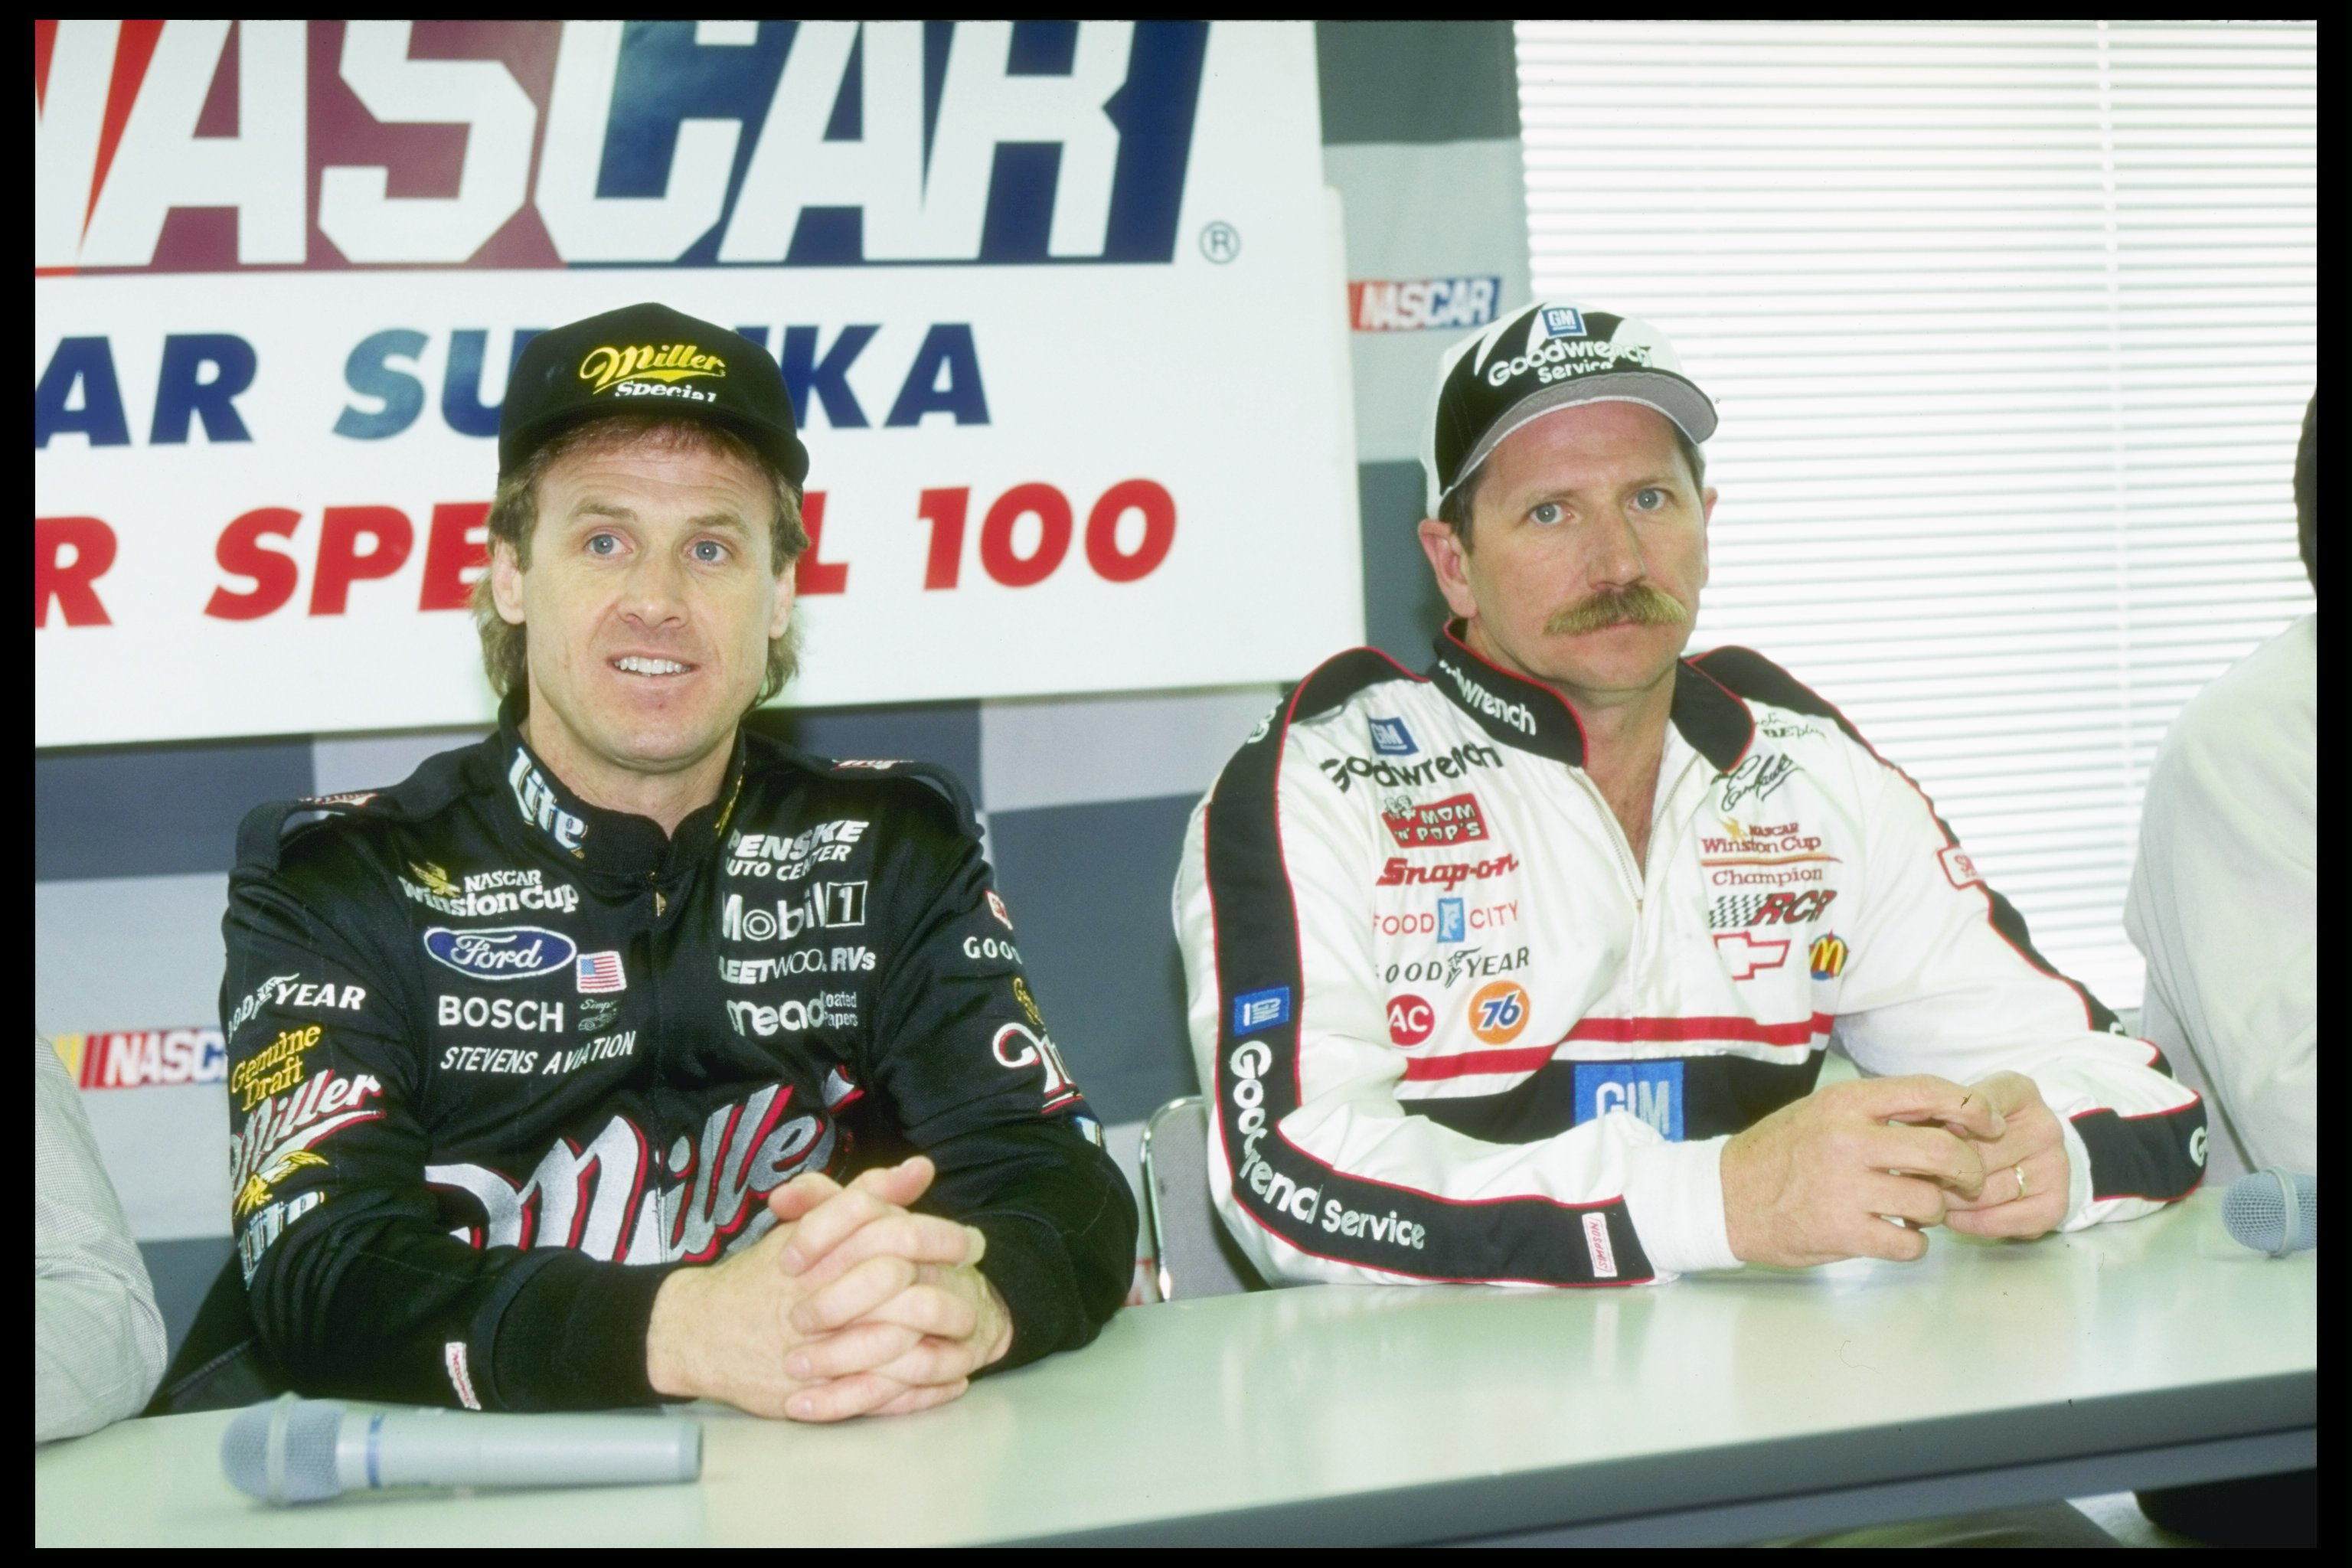 Rusty Wallace and Dale Earnhardt, left to right, were NASCAR Cup Series racing rivals who got along off the track. | Allsport/Getty Images